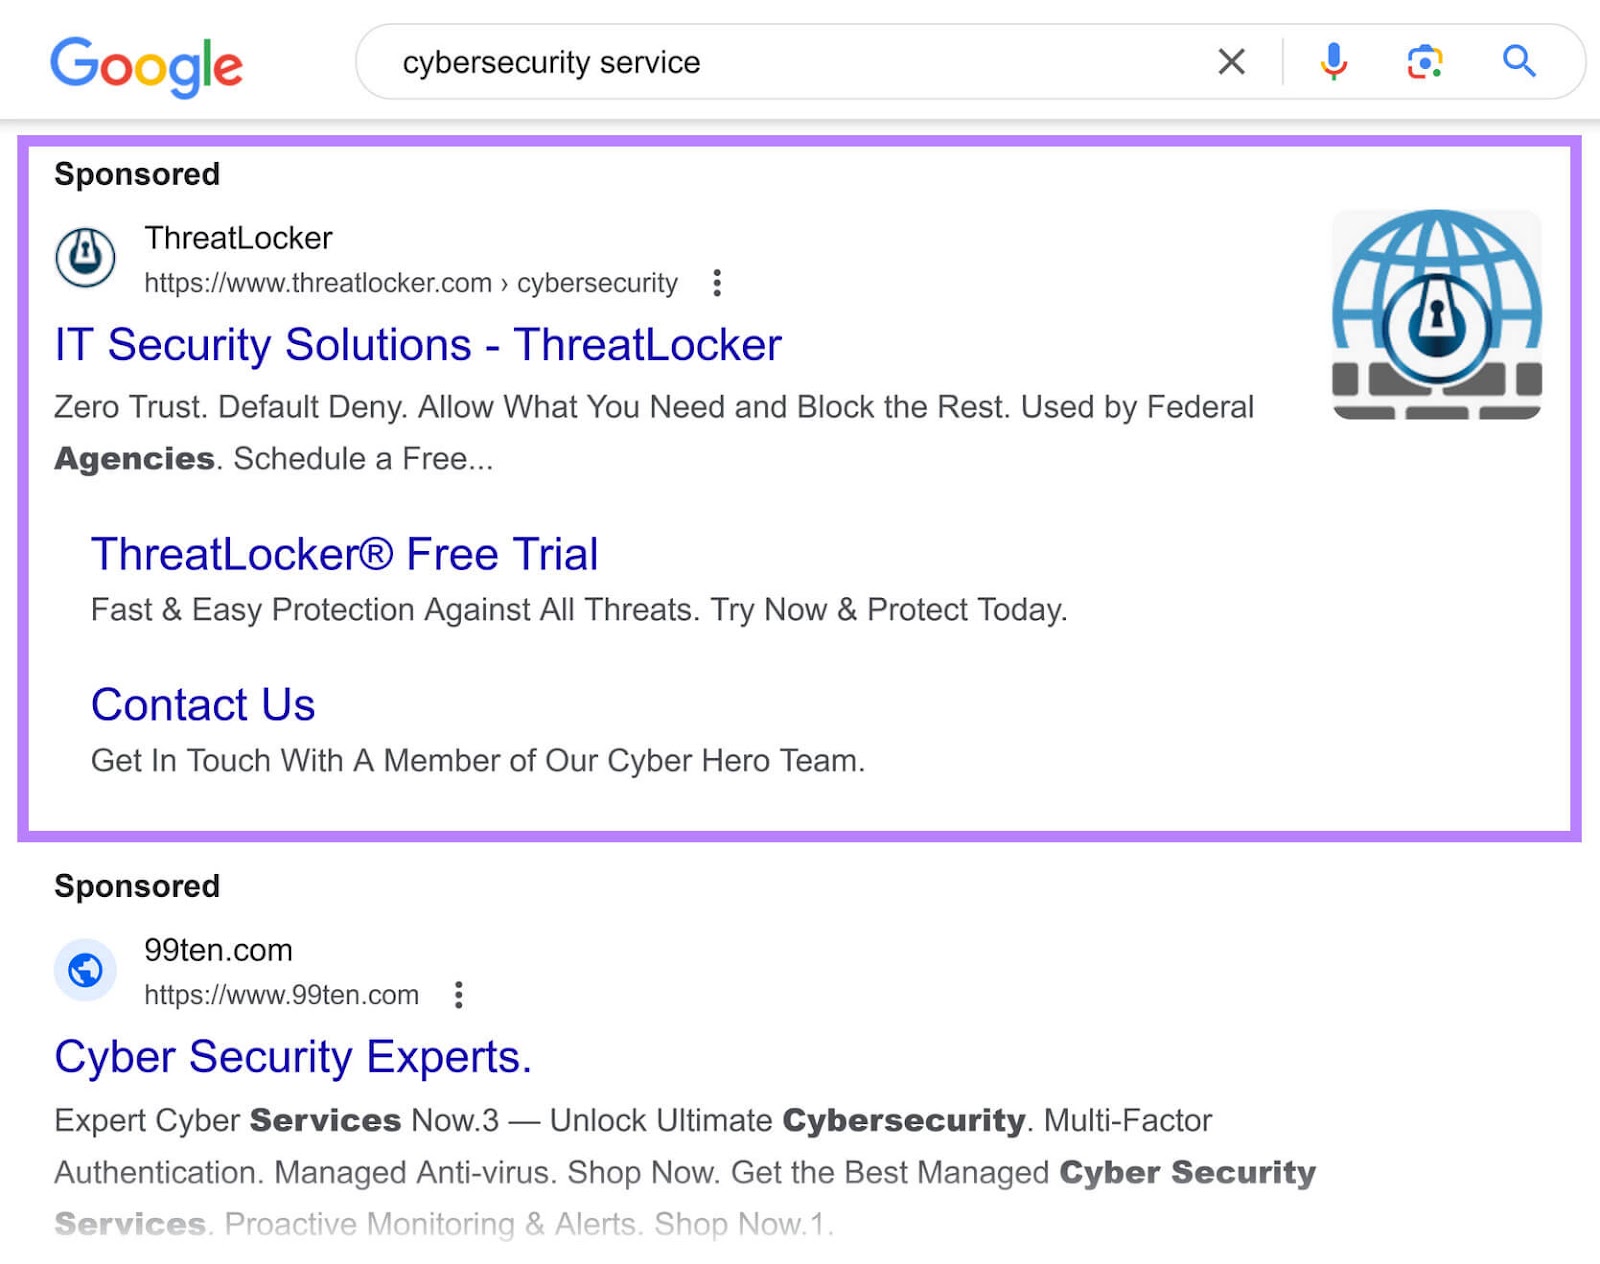 Dynamic search ad (DSA) on Google SERP for "cybersecurity service"